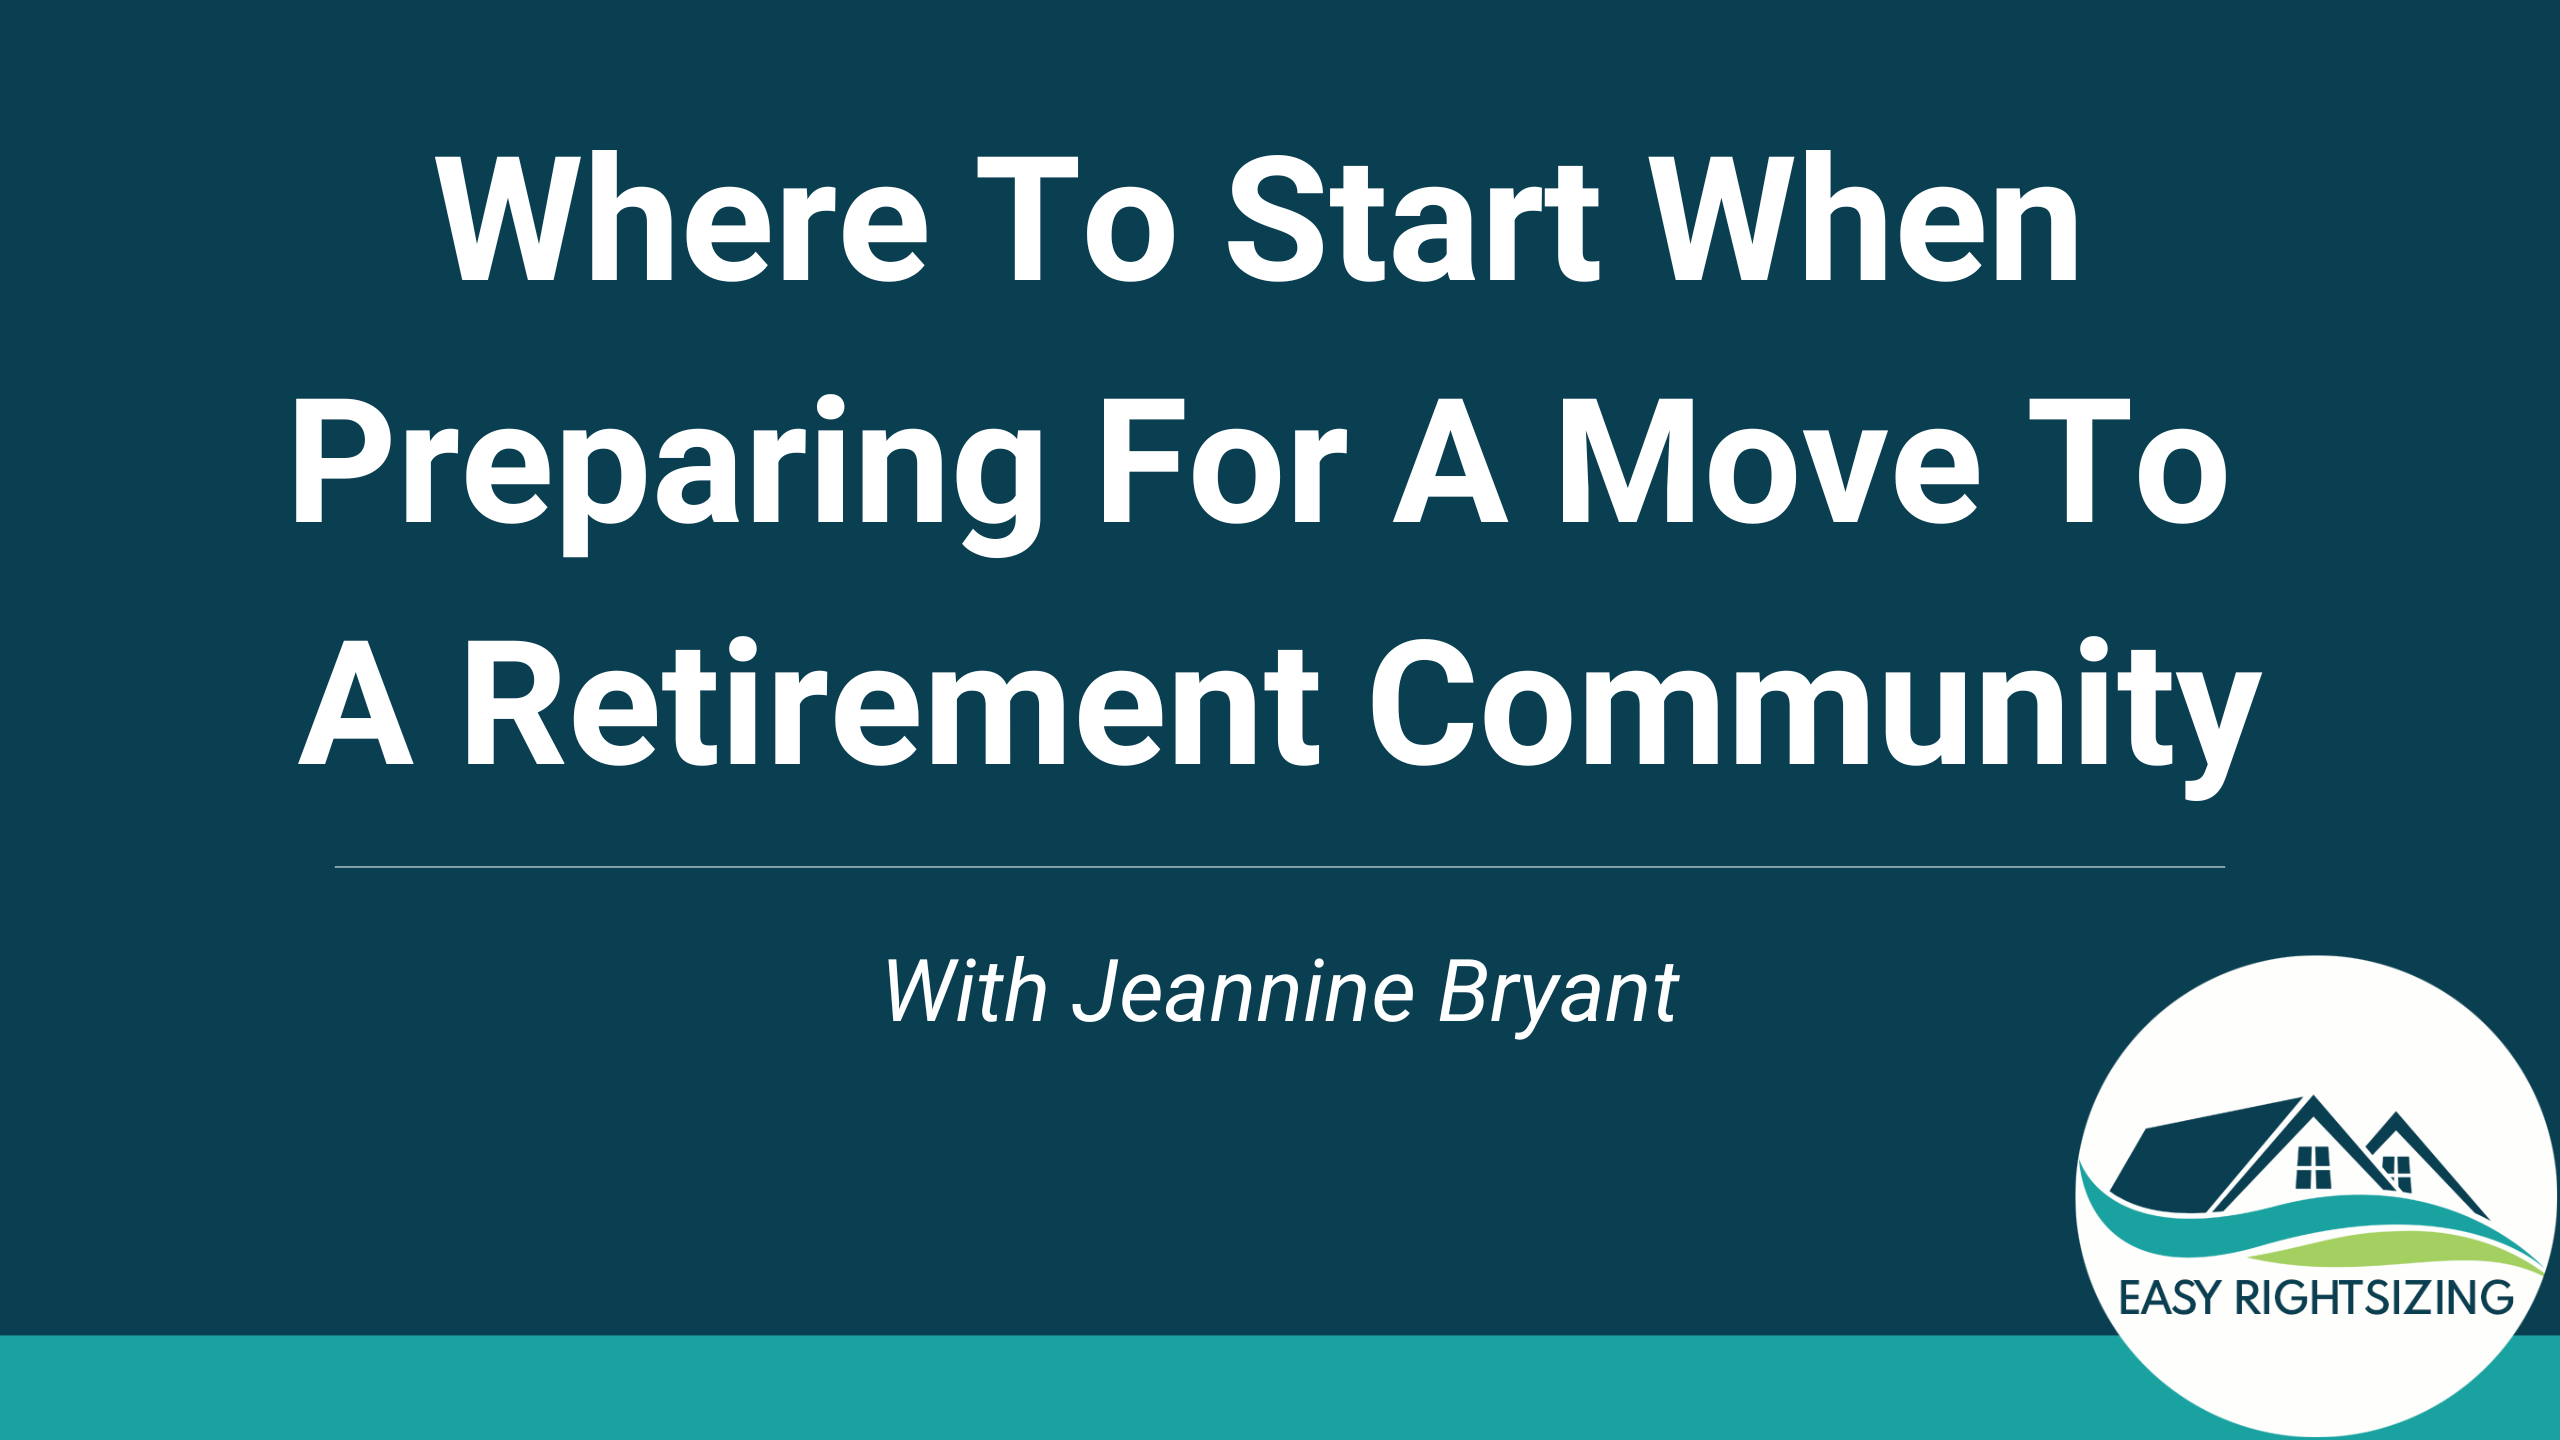 Where To Start When Preparing For A Move To A Retirement Community